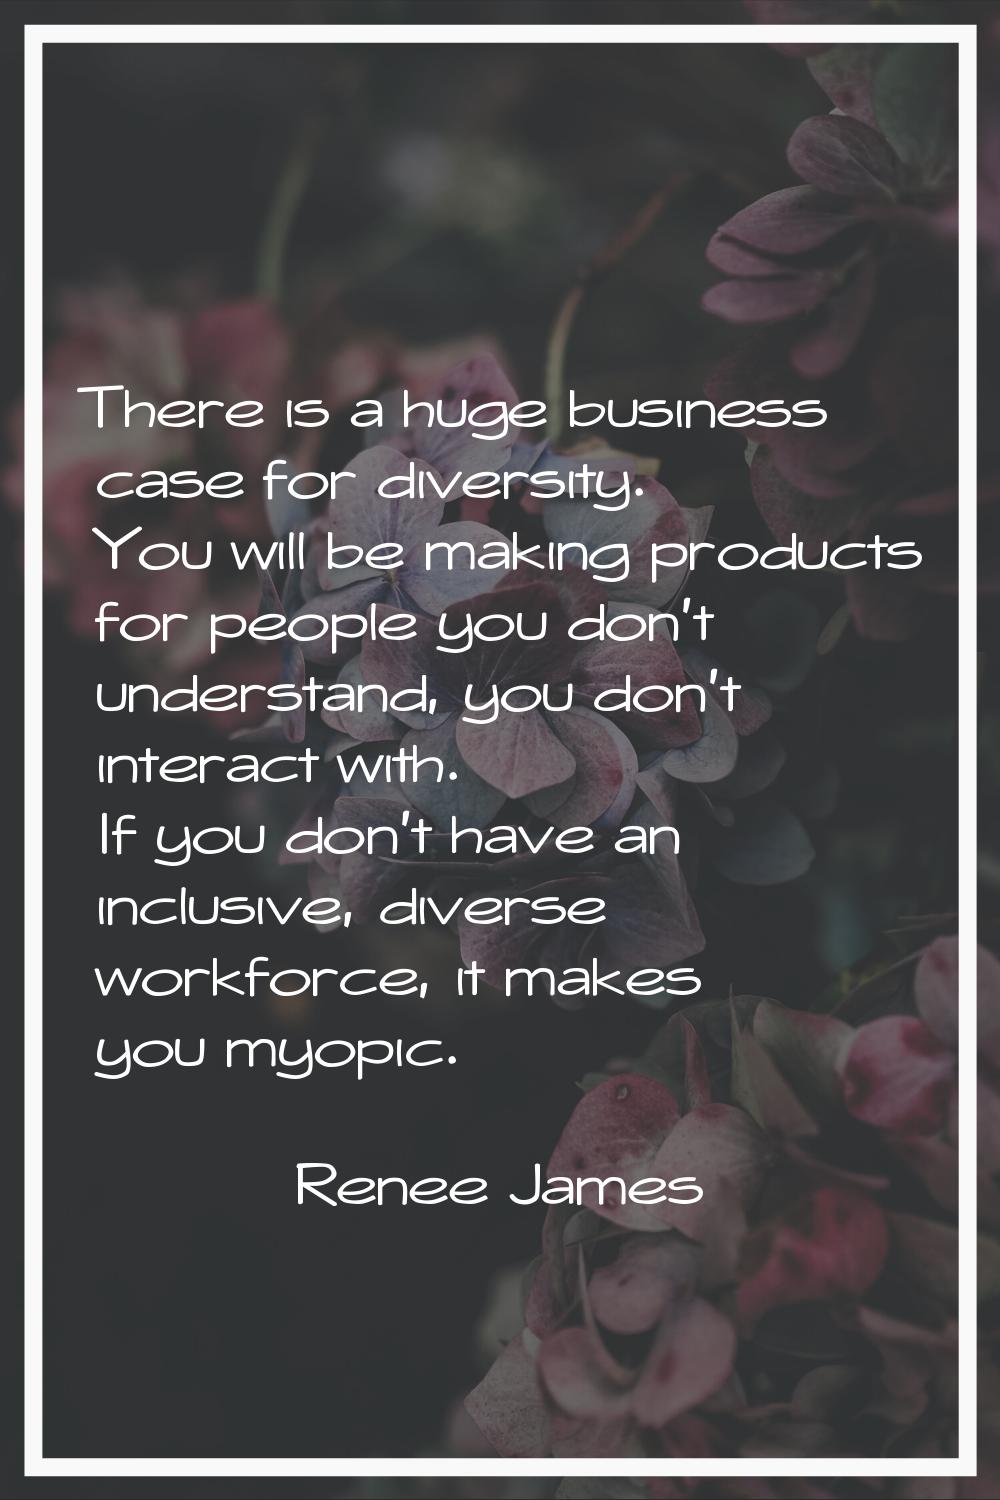 There is a huge business case for diversity. You will be making products for people you don't under